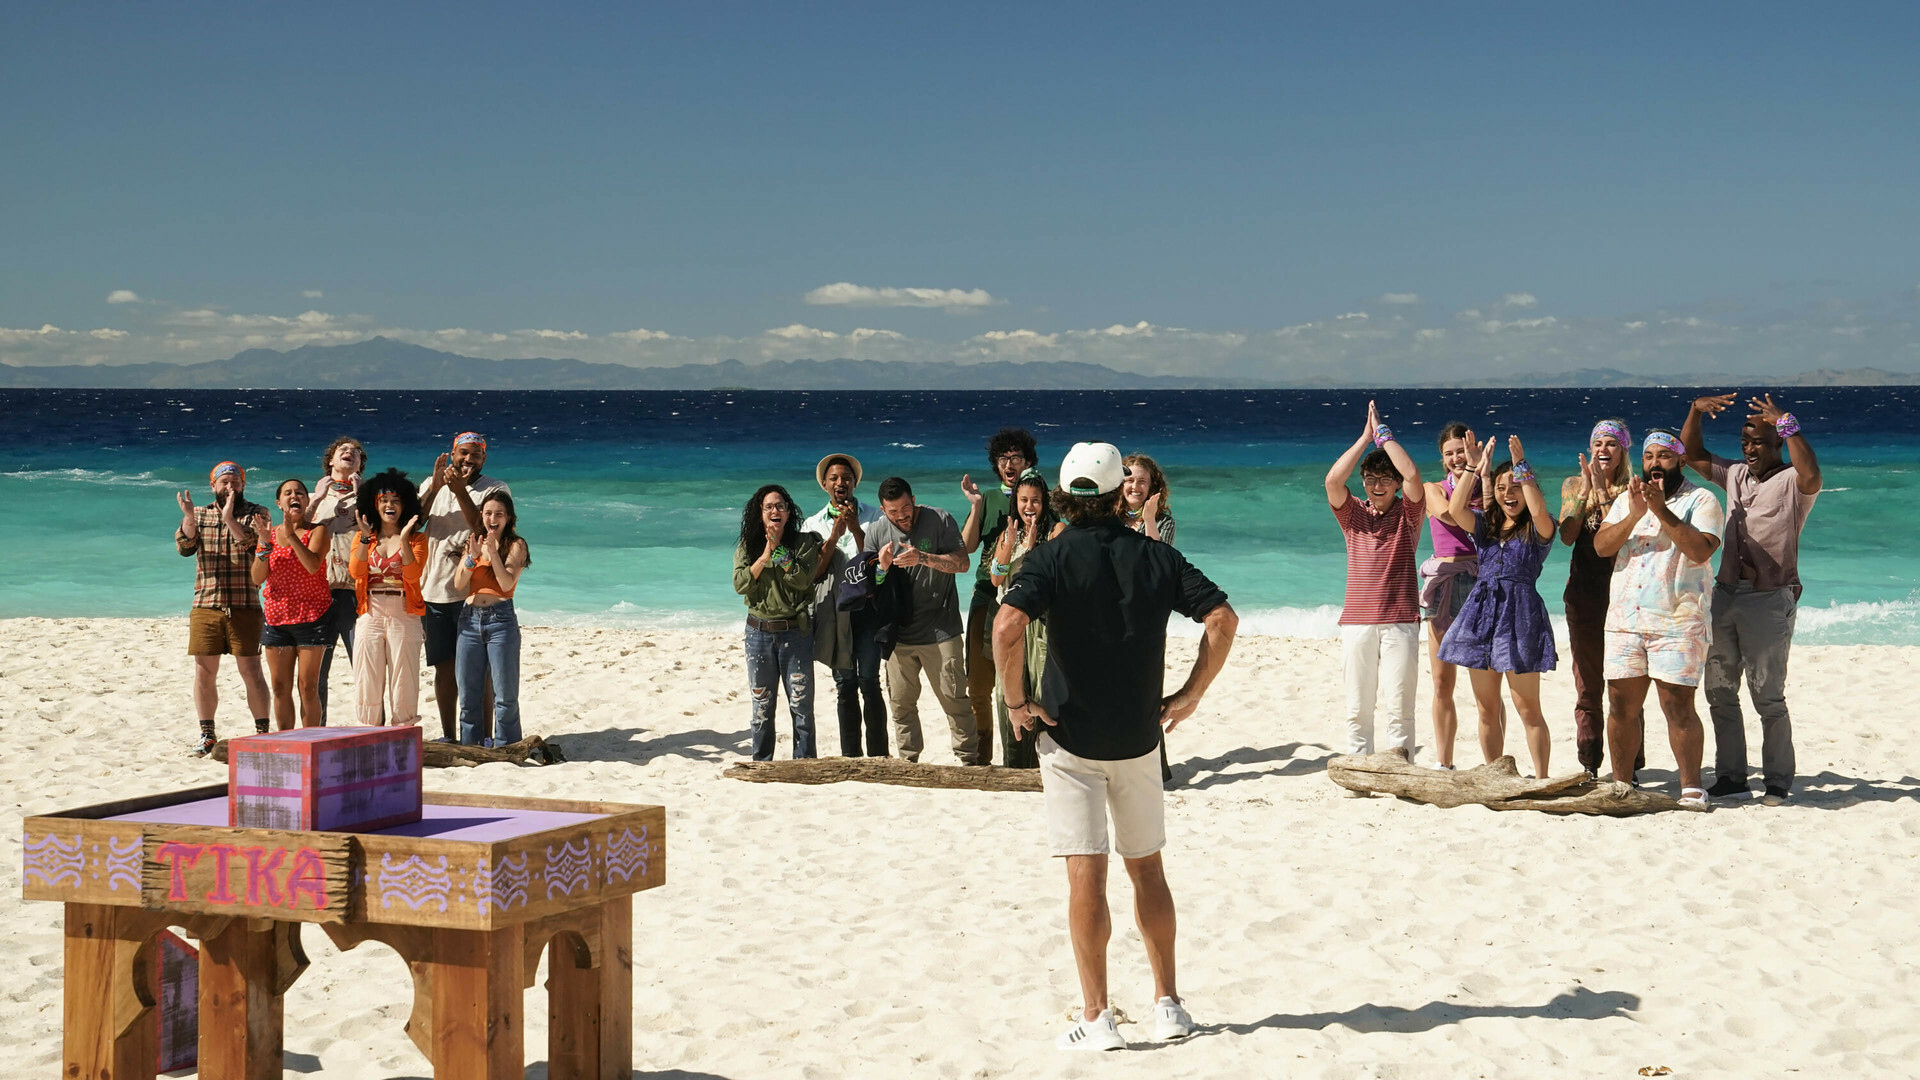 How to watch 'Survivor' Season 45: Time, TV channel, live stream